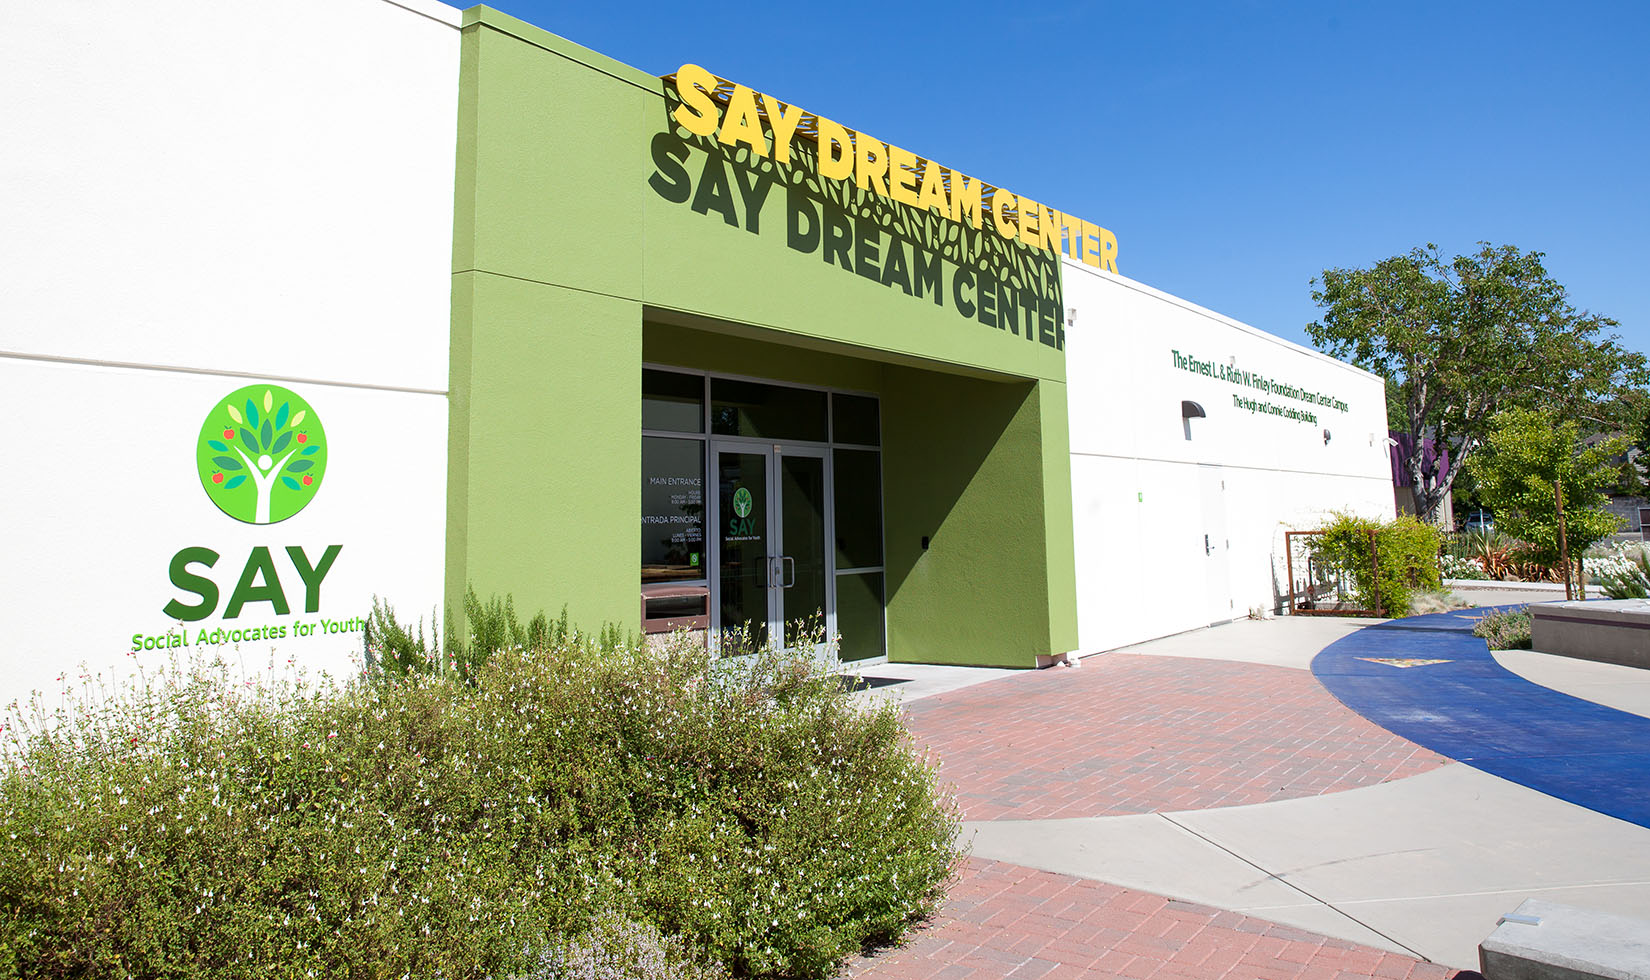 SAY Dream Center green and white building